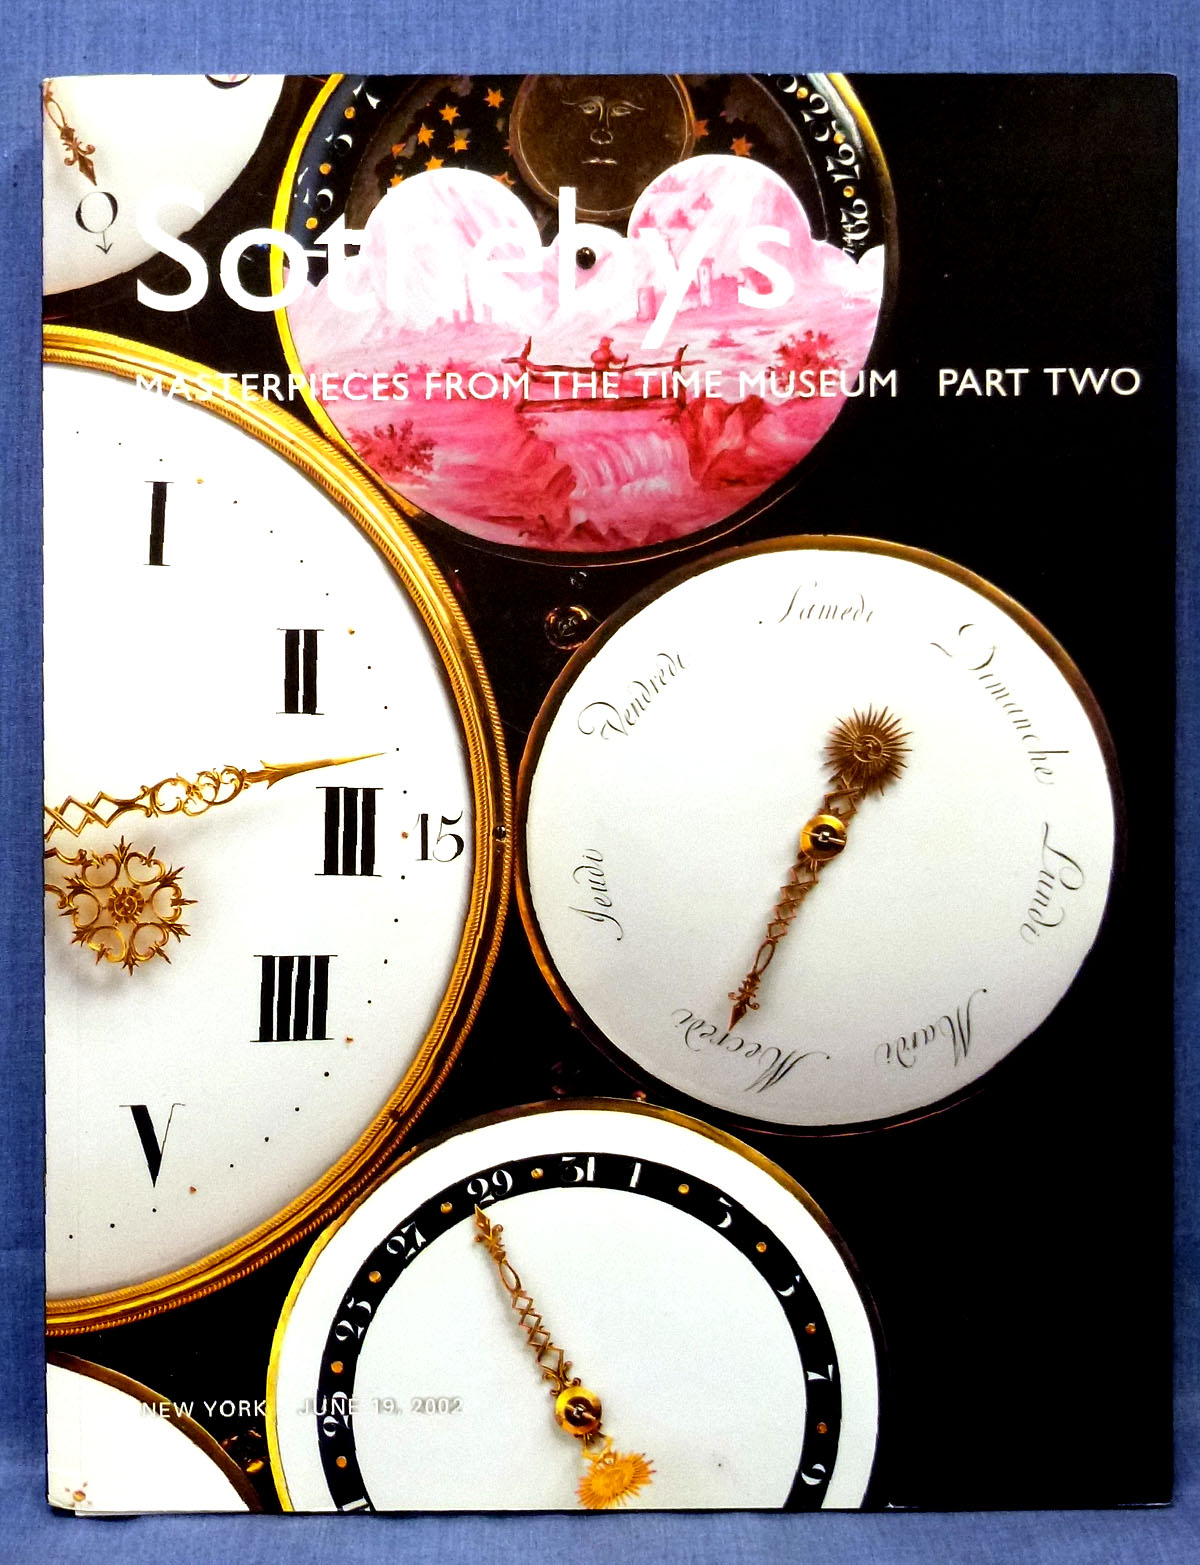 Sotheby's superb timepieces! 2002 MASTERPIECES FROM THE TIME MUSEUM PART 2 